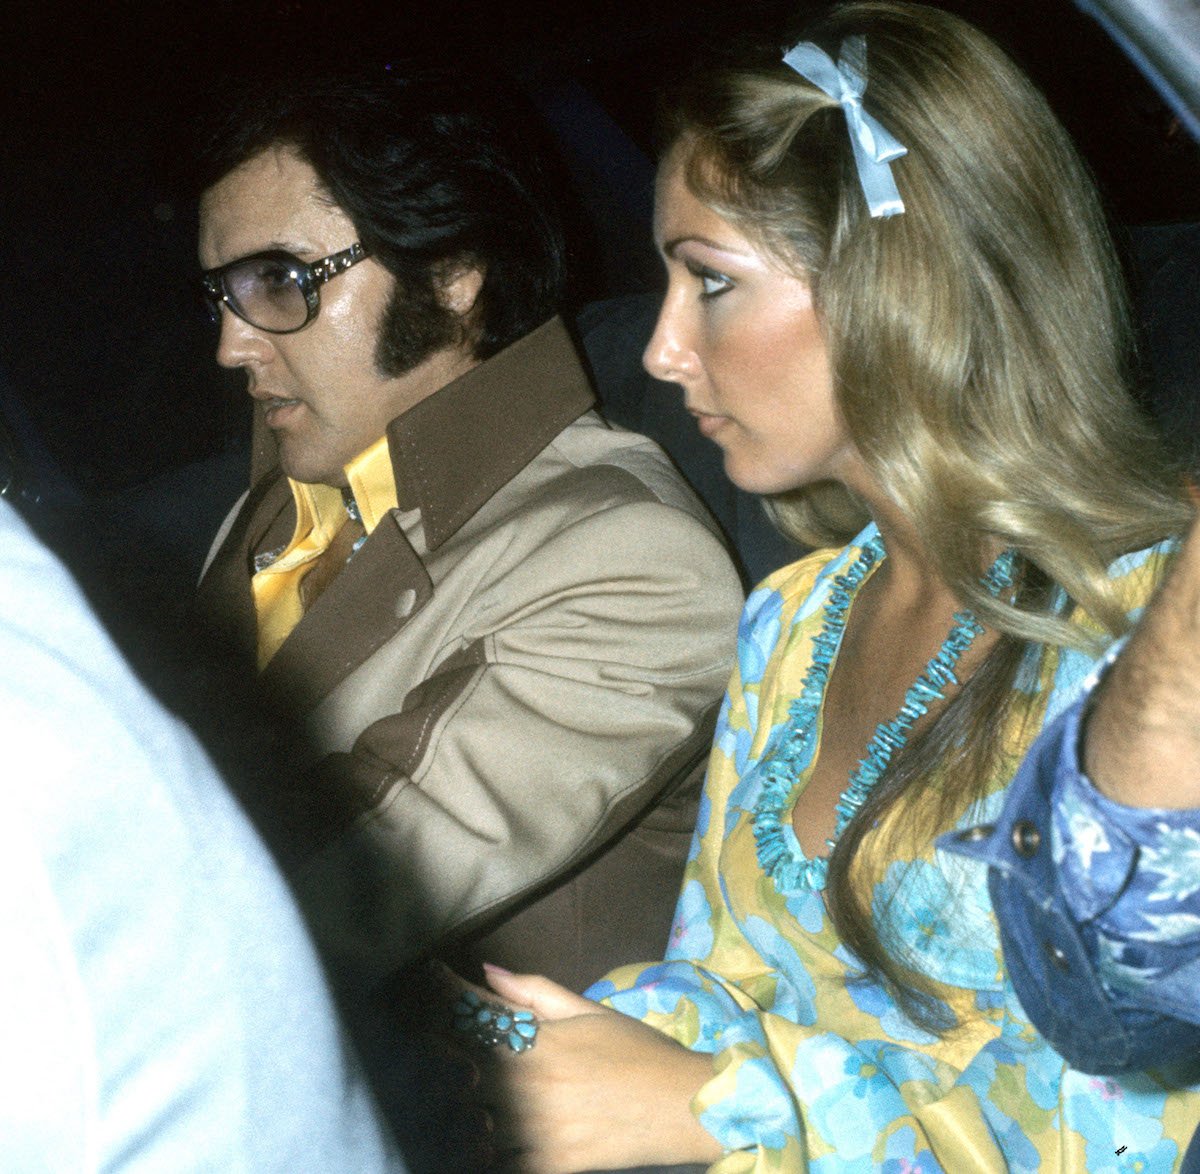 Elvis Presley rides in the car with his girlfriend Linda Thompson in 1976